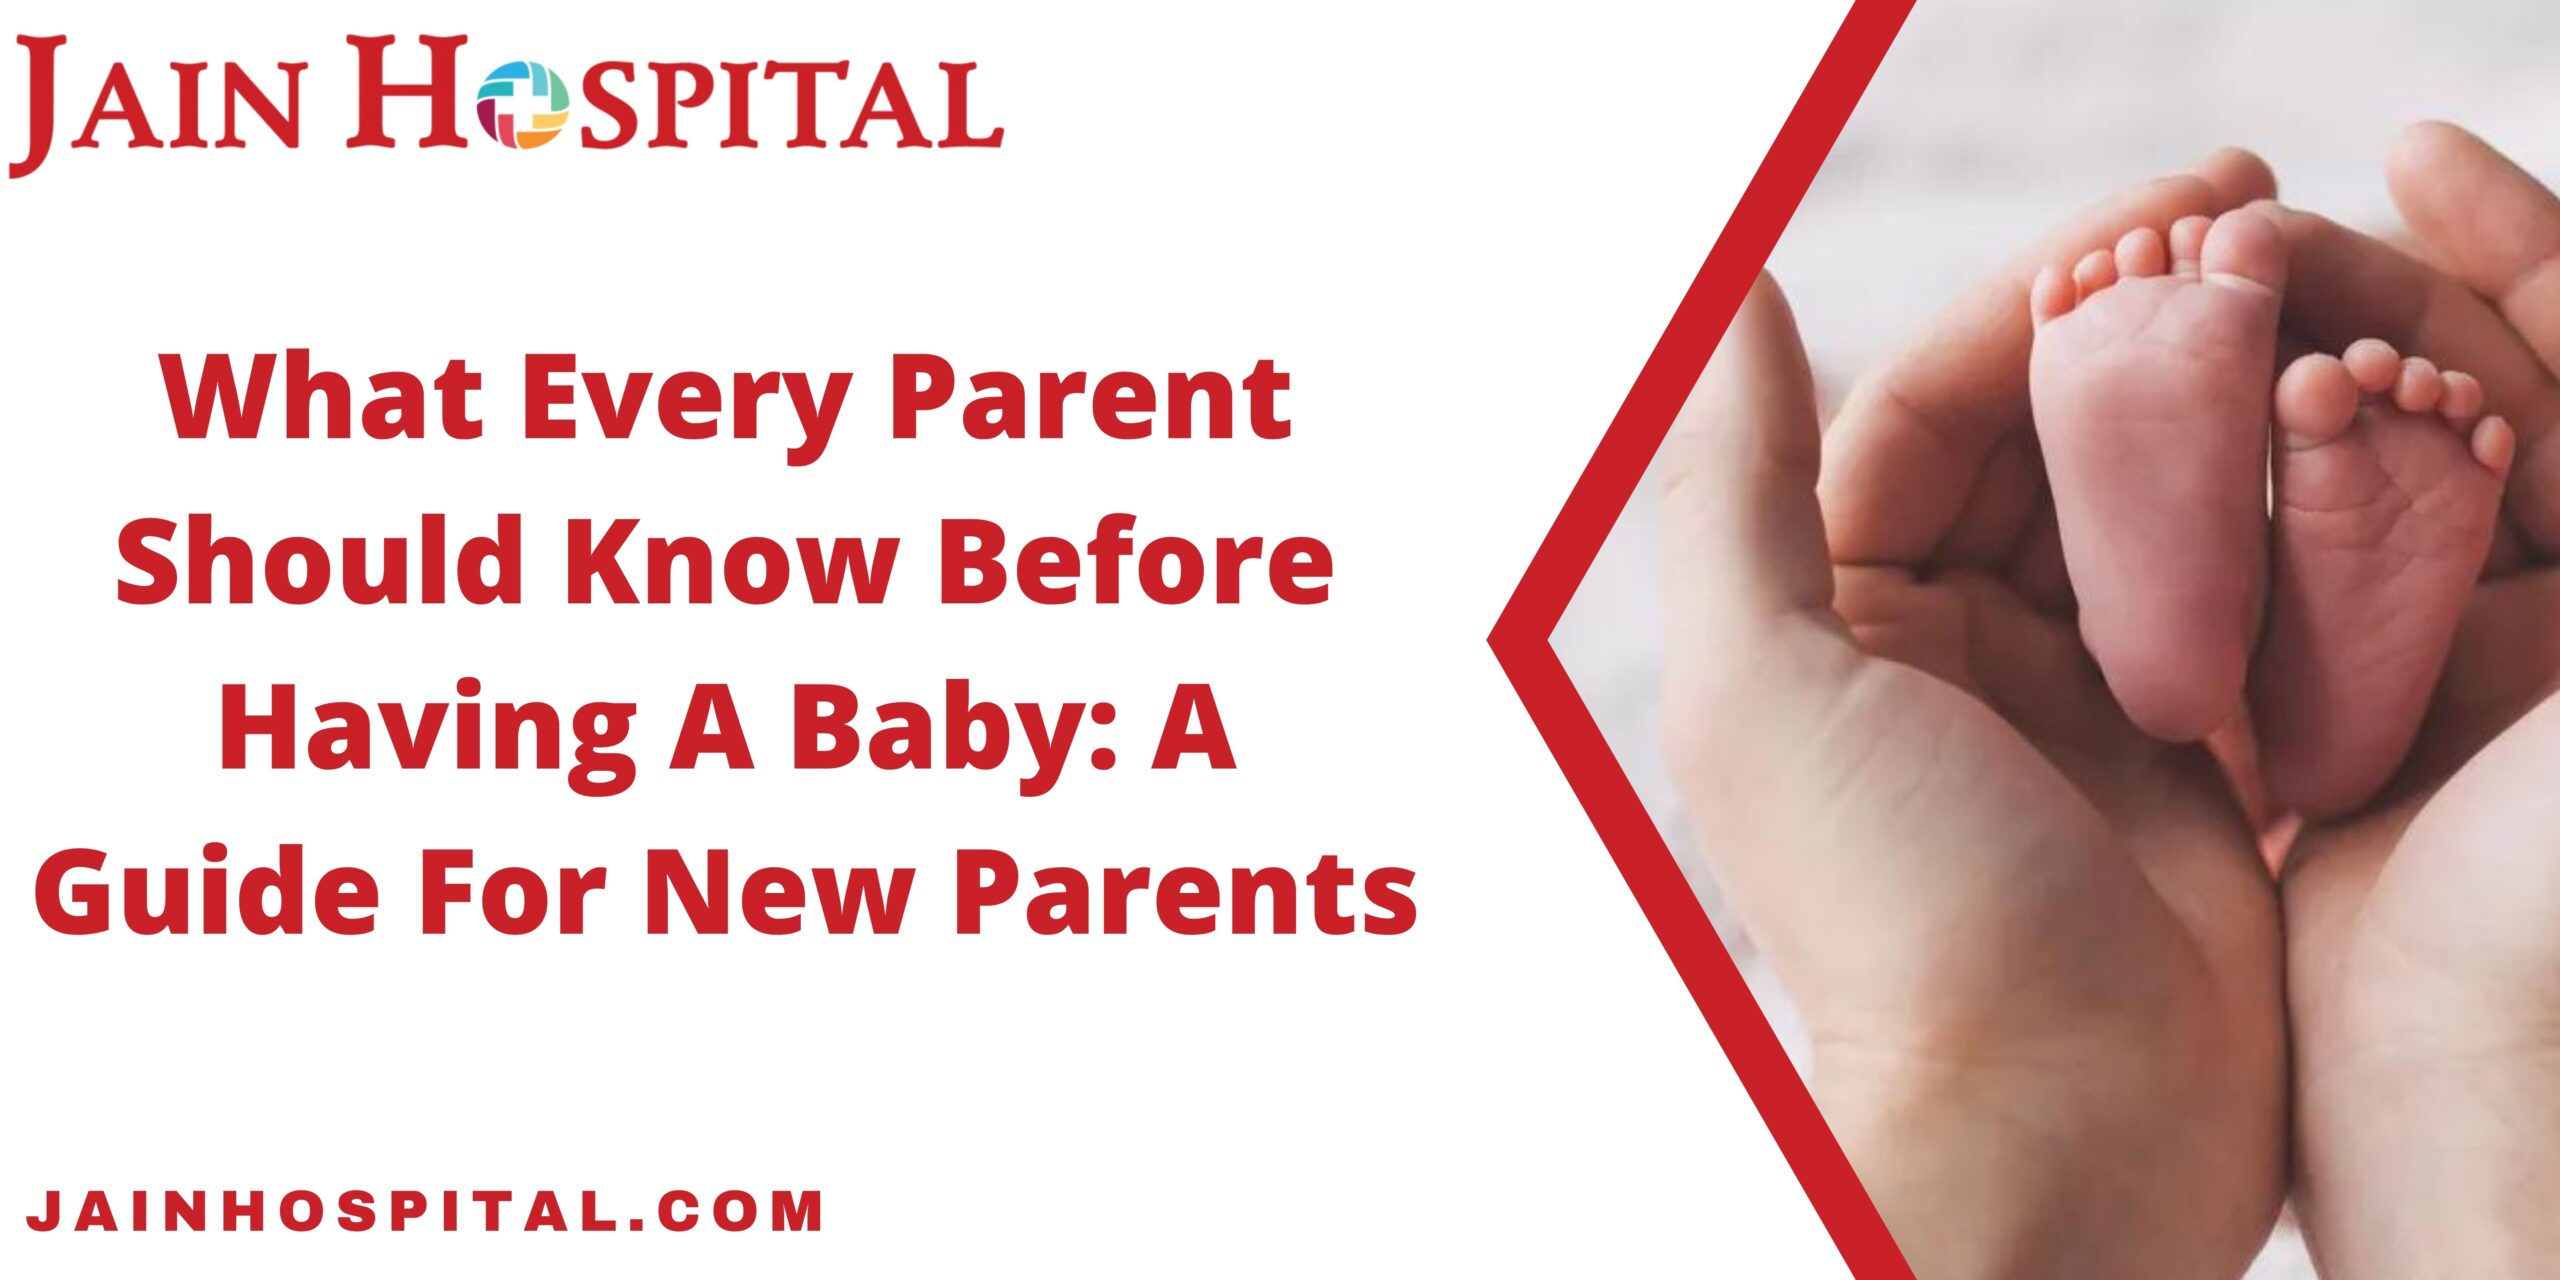 What Every Parent Should Know Before Having A Baby: A Guide For New Parents